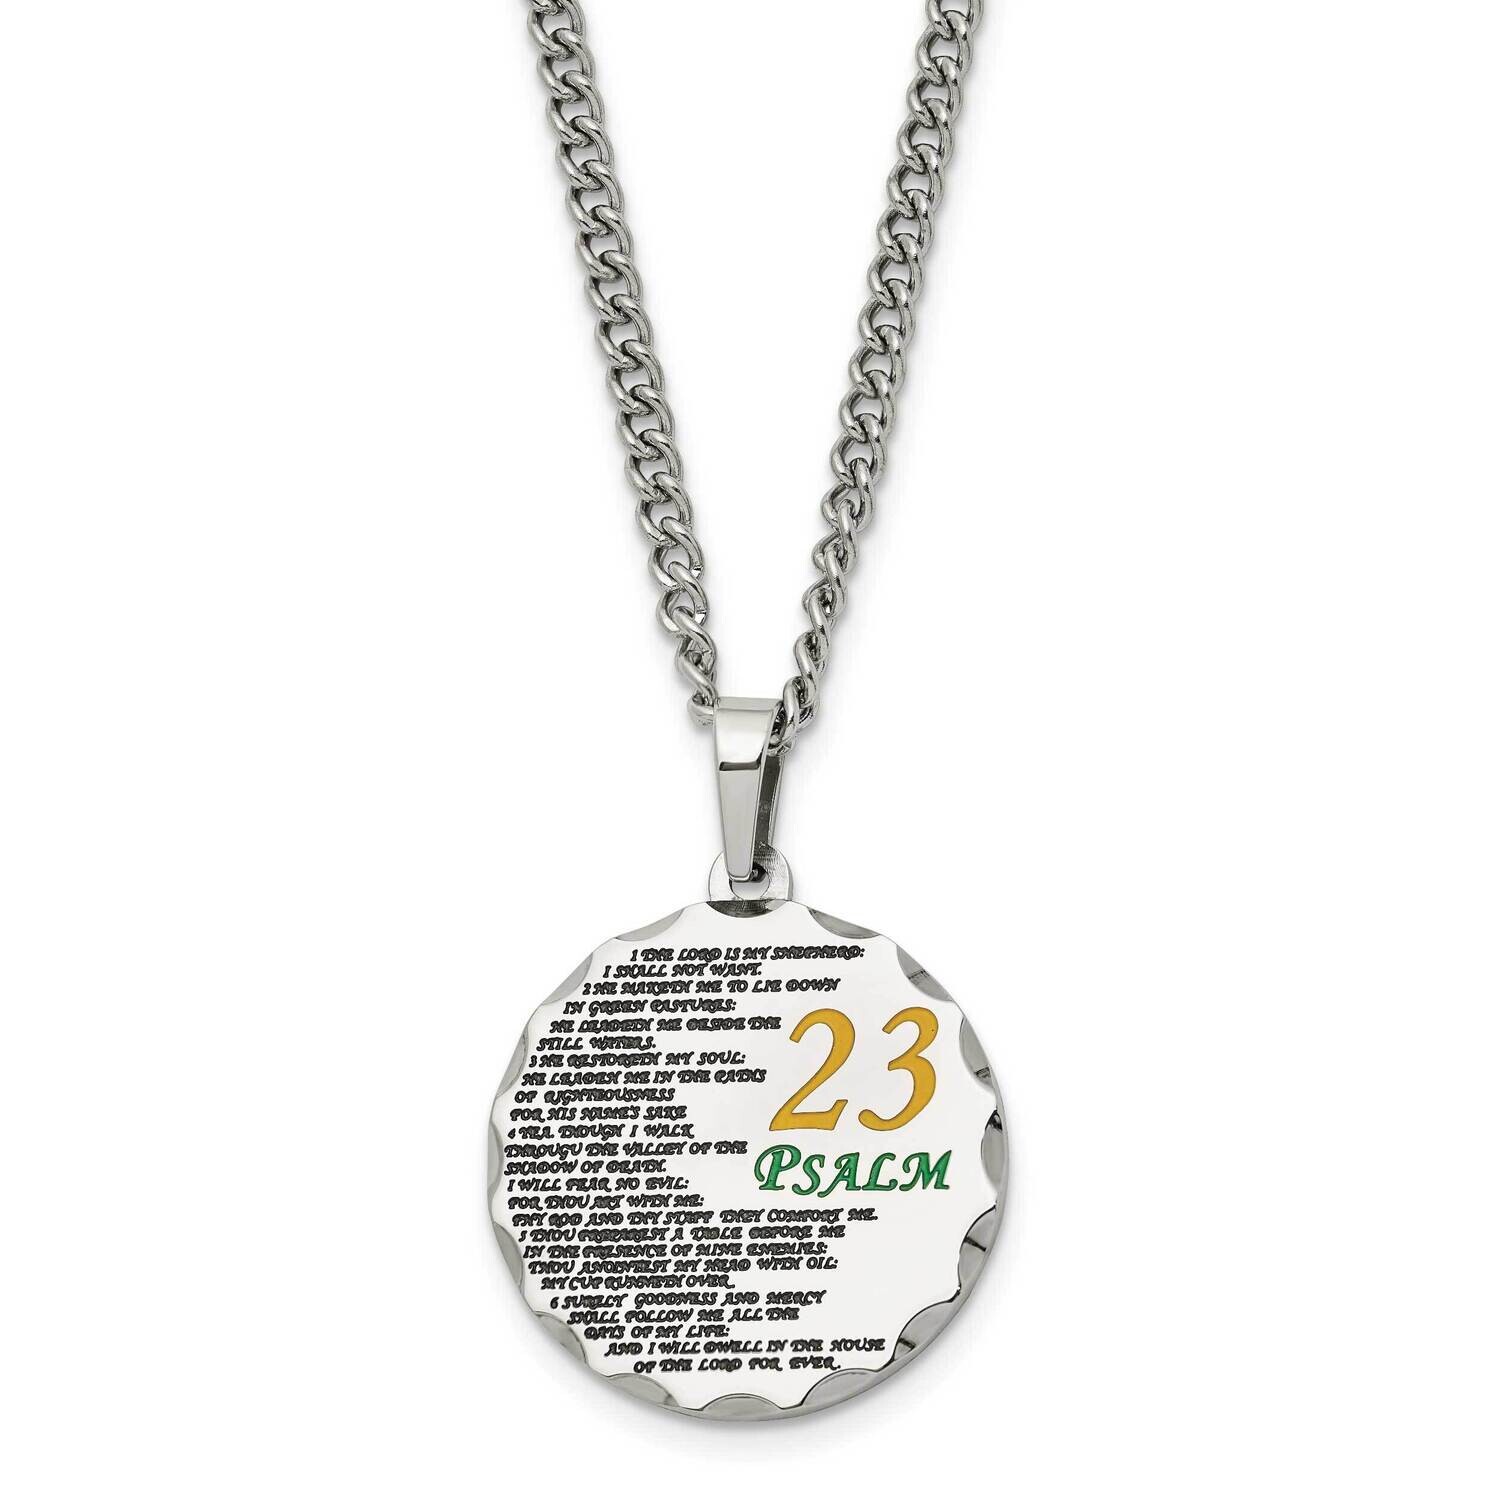 Chisel Polished Acid Etched Psalm 23 Pendant On A 24 Inch Curb Chain Necklace Stainless Steel SRN3095-24